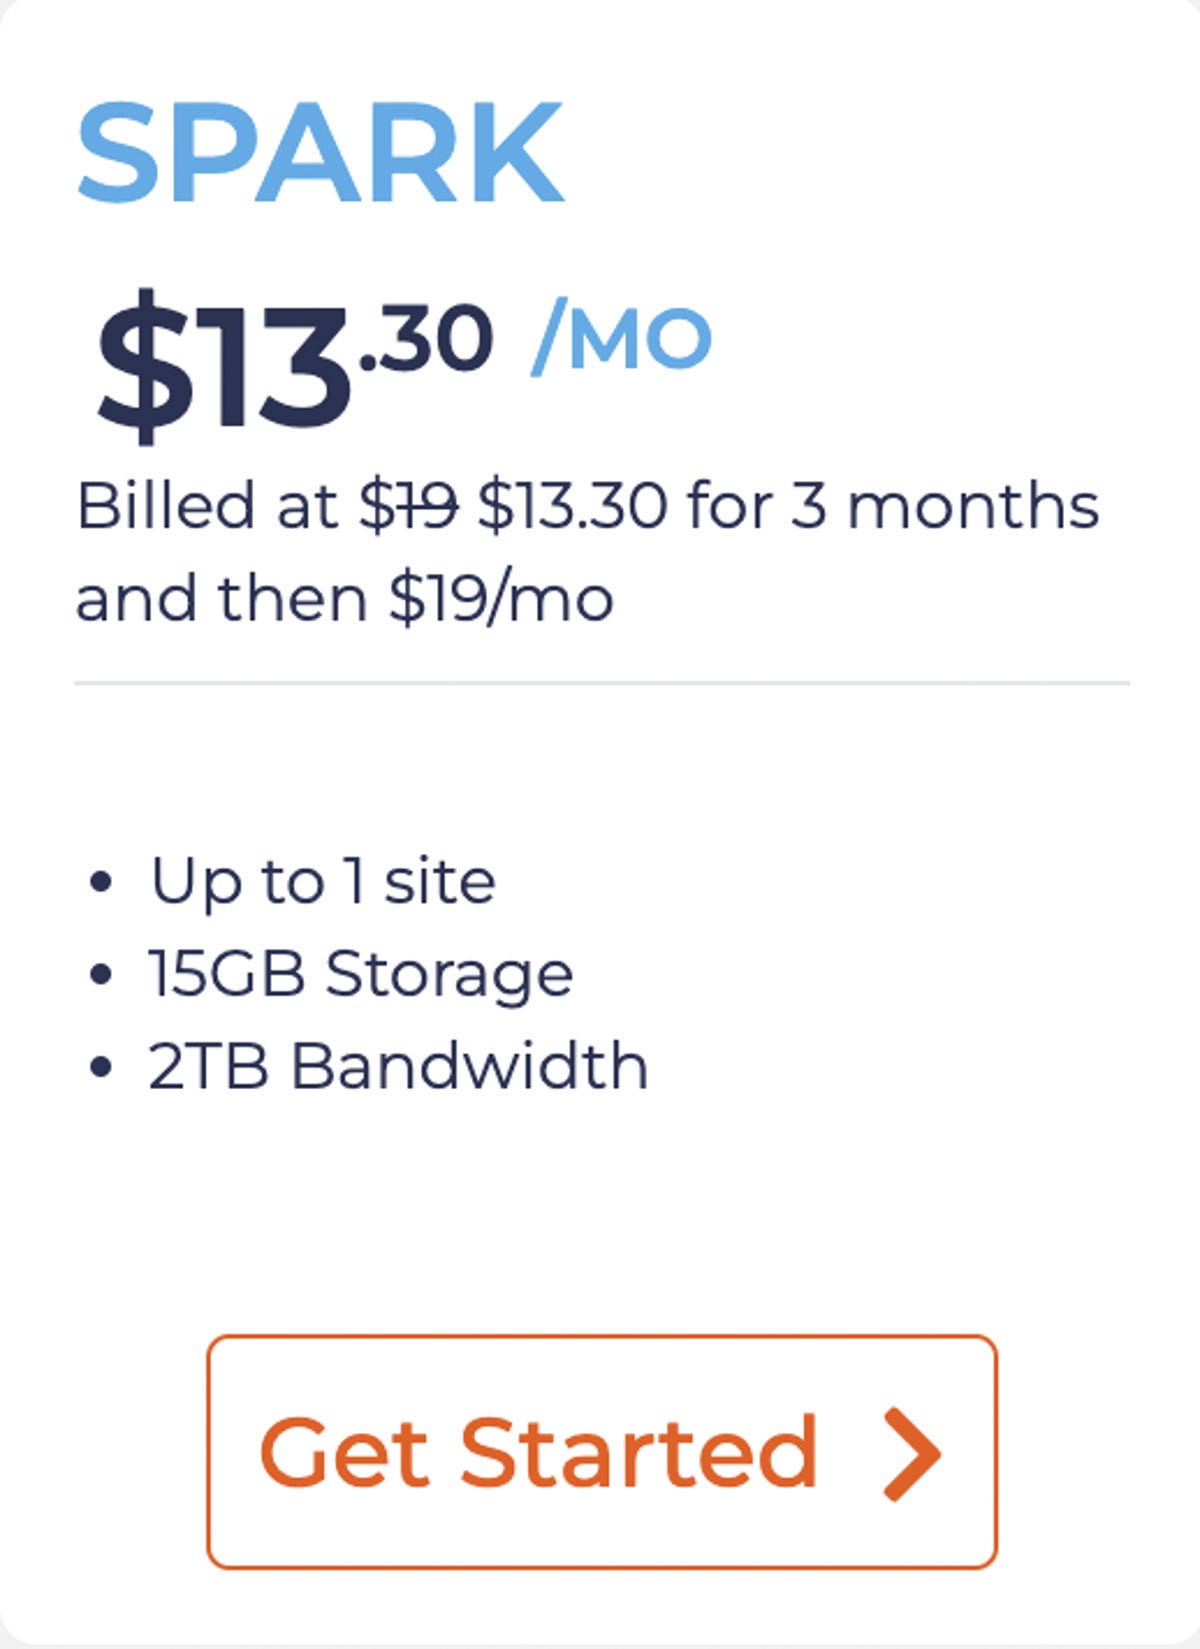 Spark costs $13.30 a month for first three months and then $19 a month